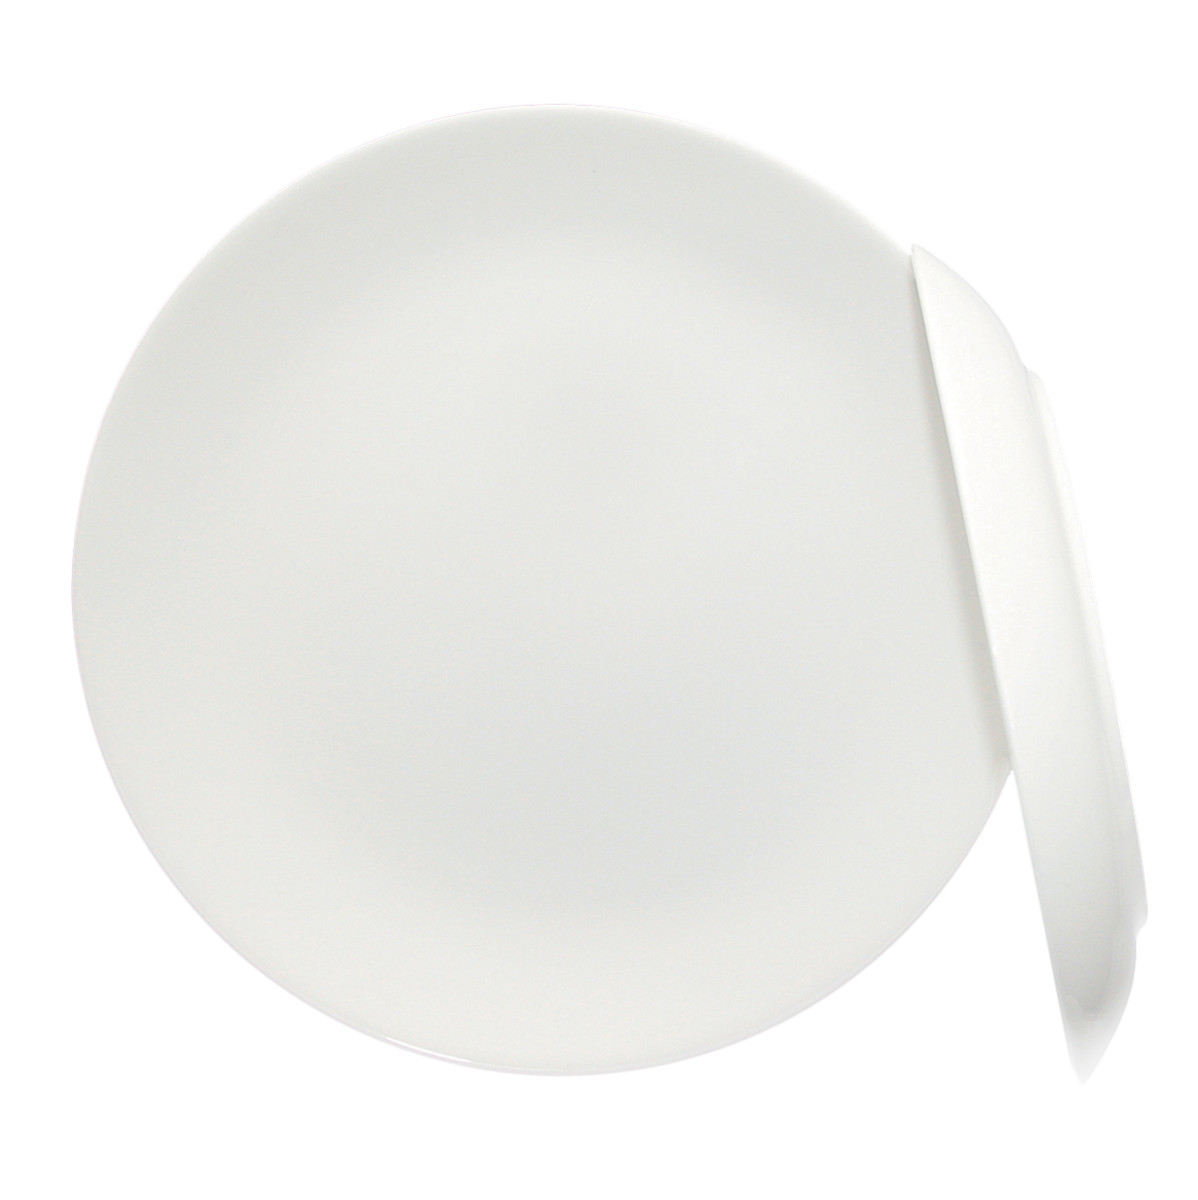 Purio Coupe Bread & Butter Plate 6.5"